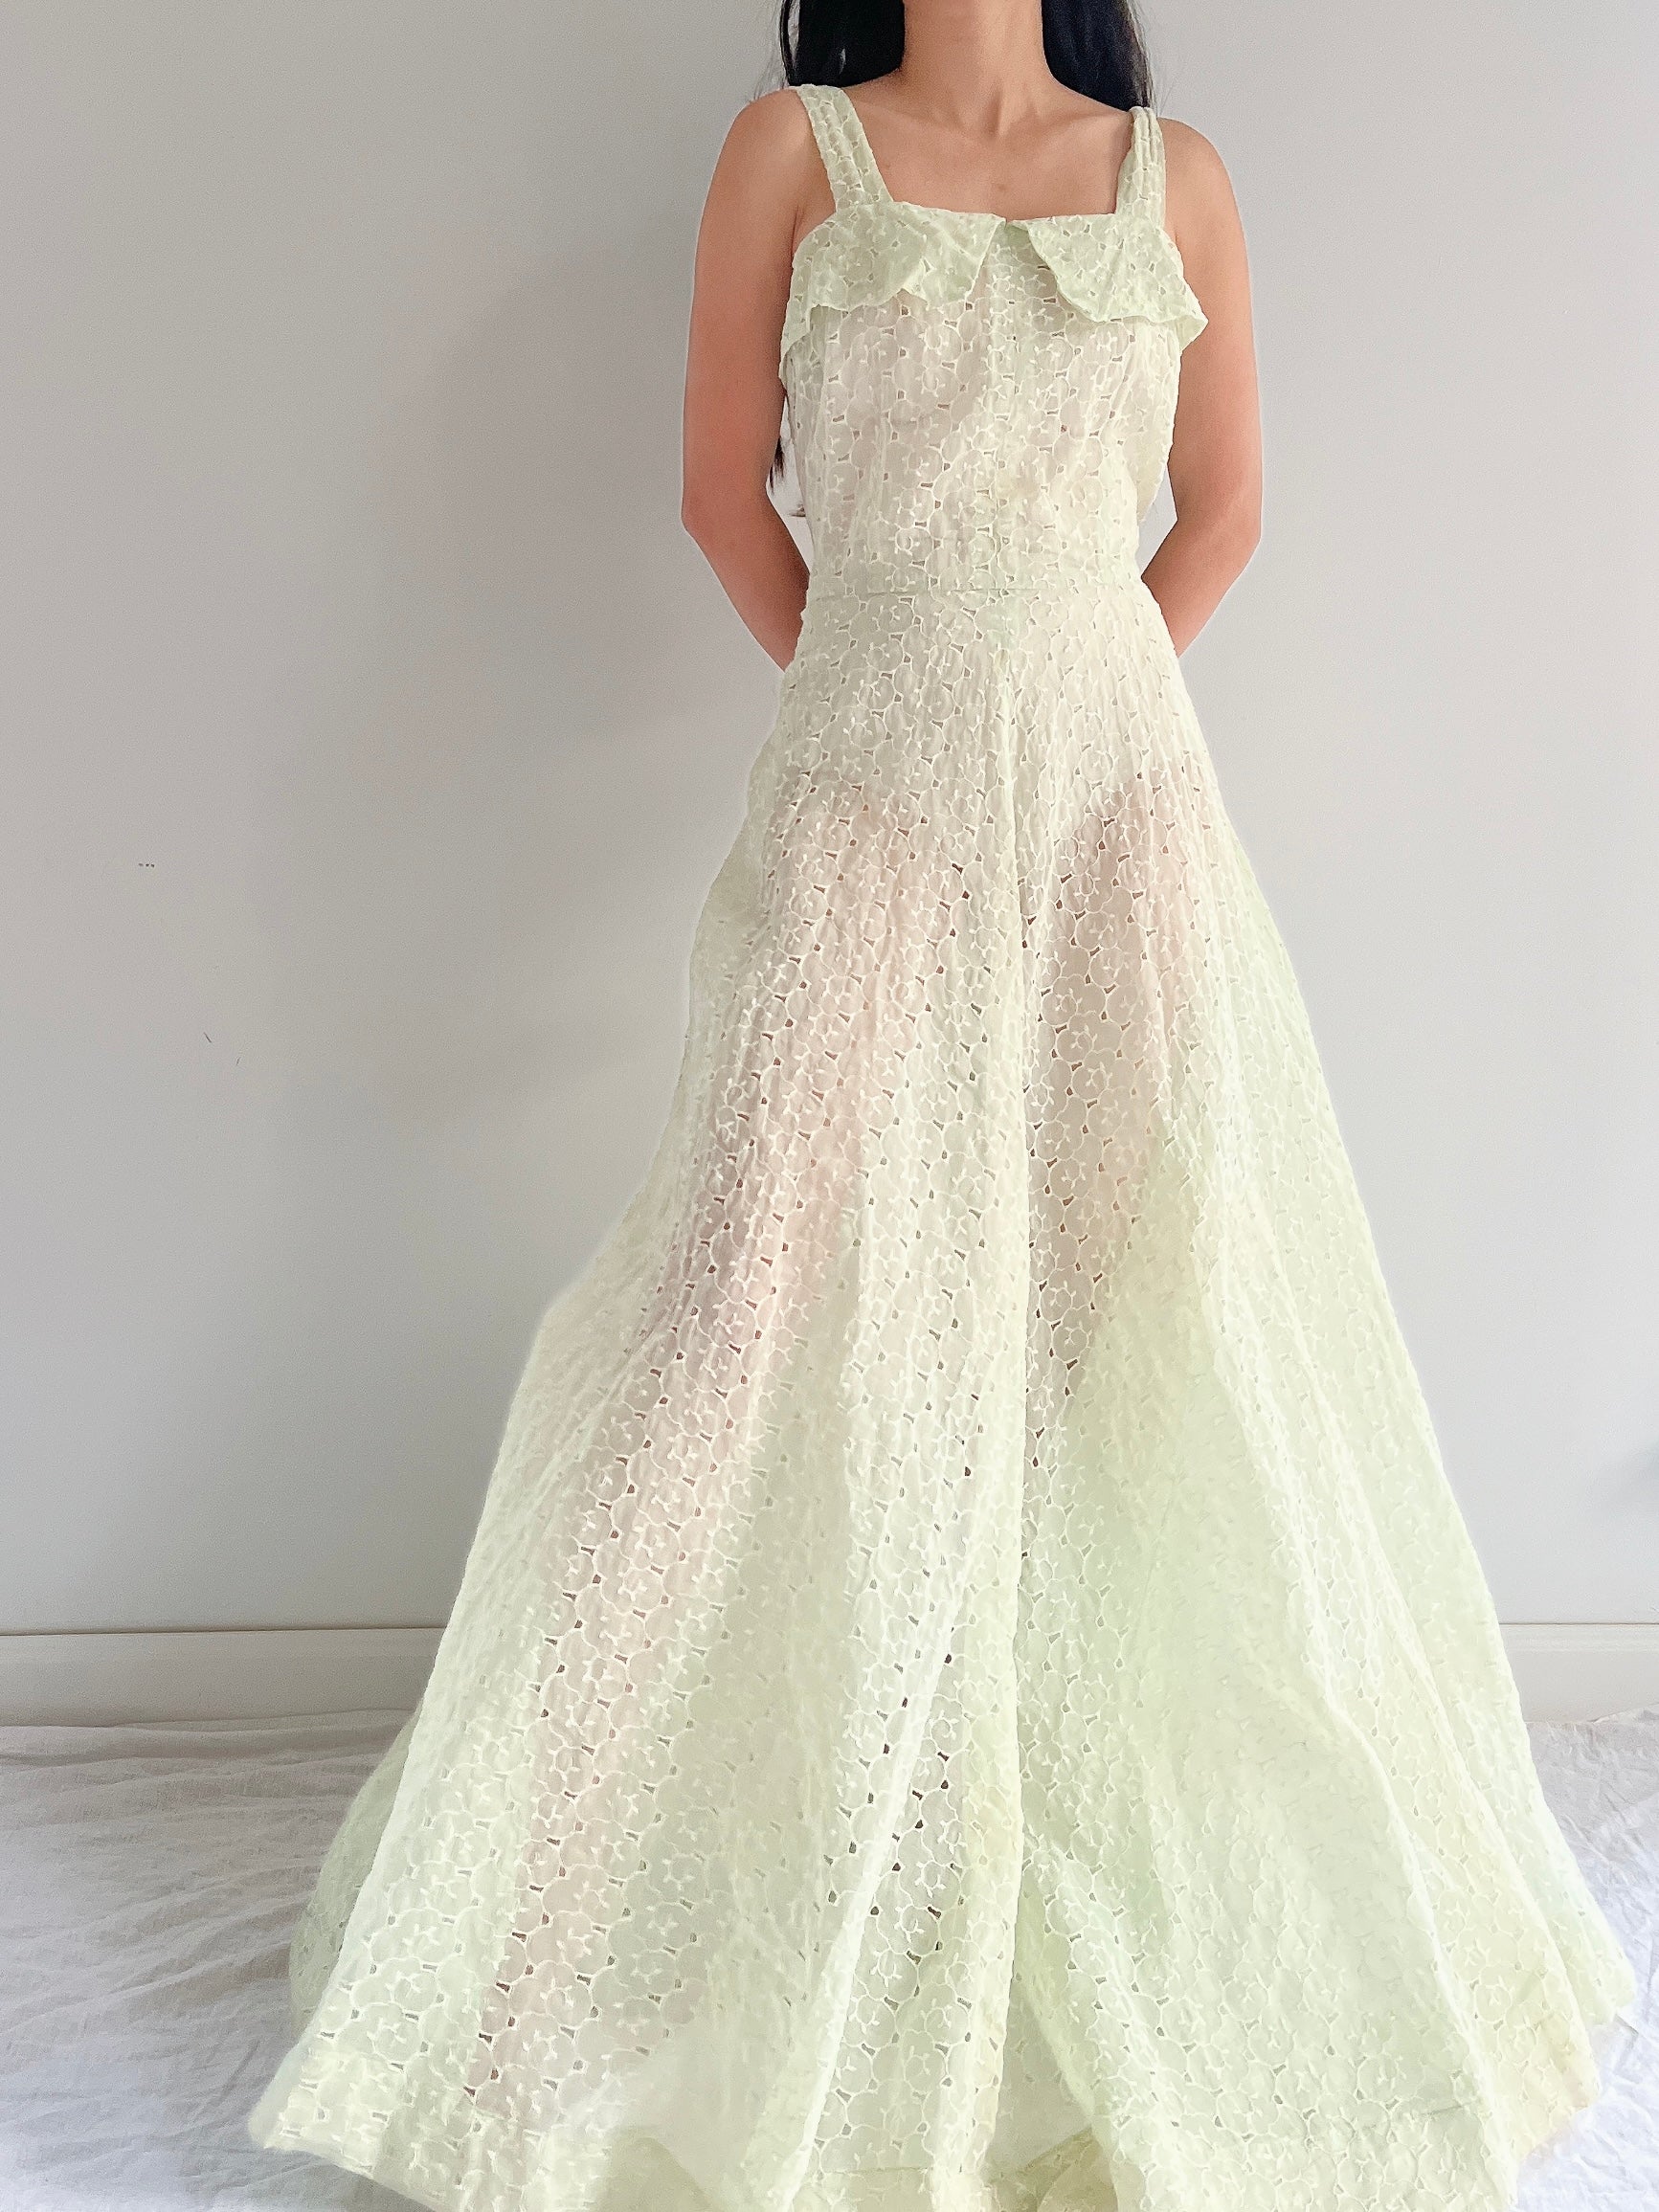 1940s/50s Mint Green Organdy Eyelet Gown - M